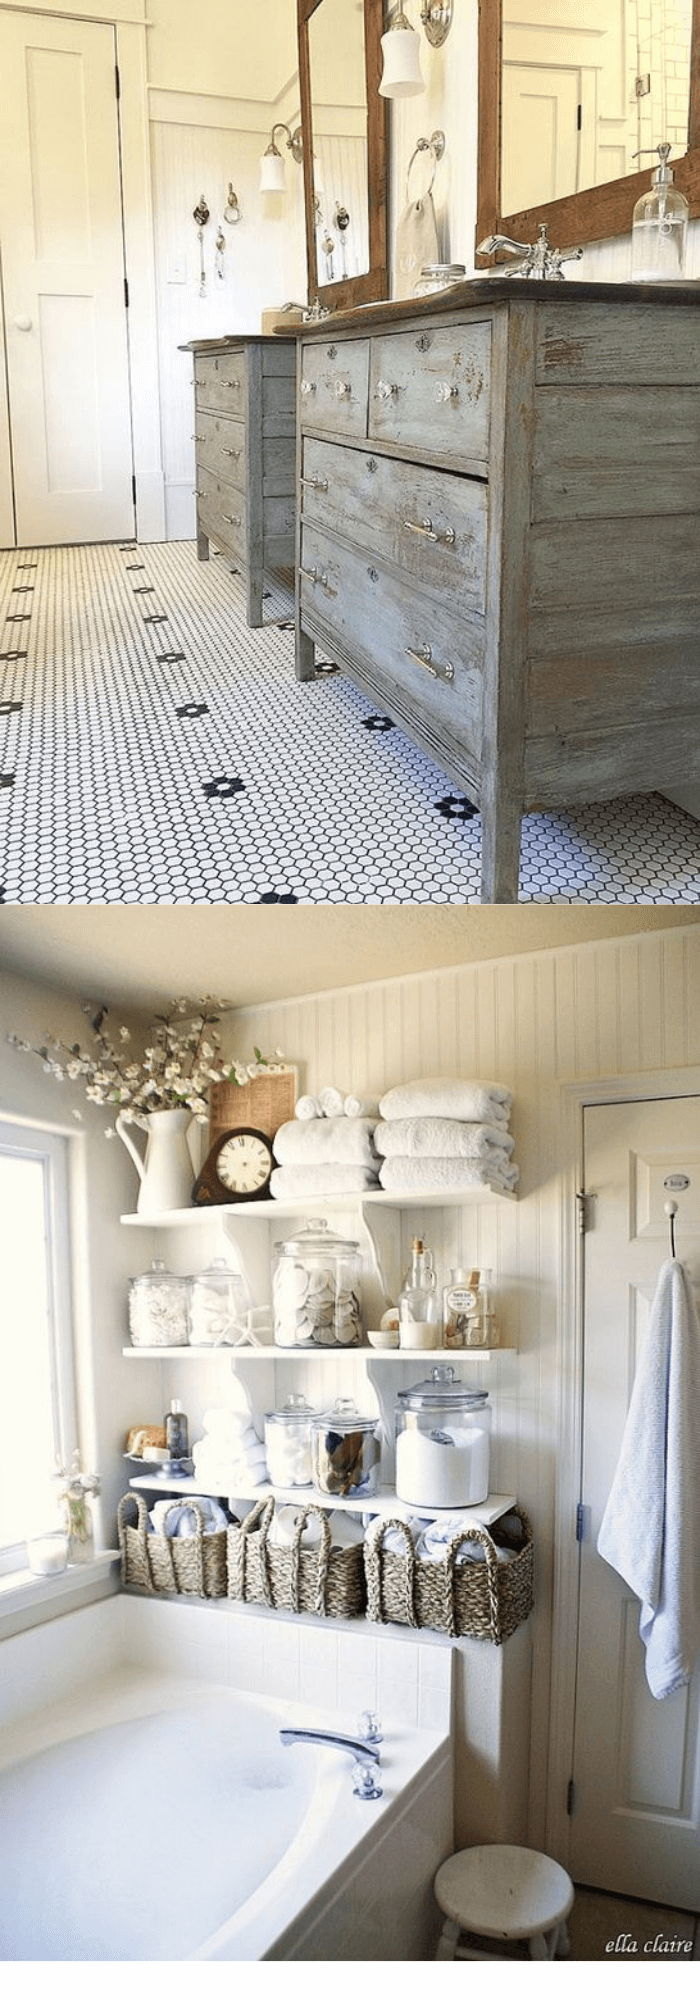 Charming Cottage Style Bathroom Ideas Double converted vanities, tile floor, painted side tables and shelves